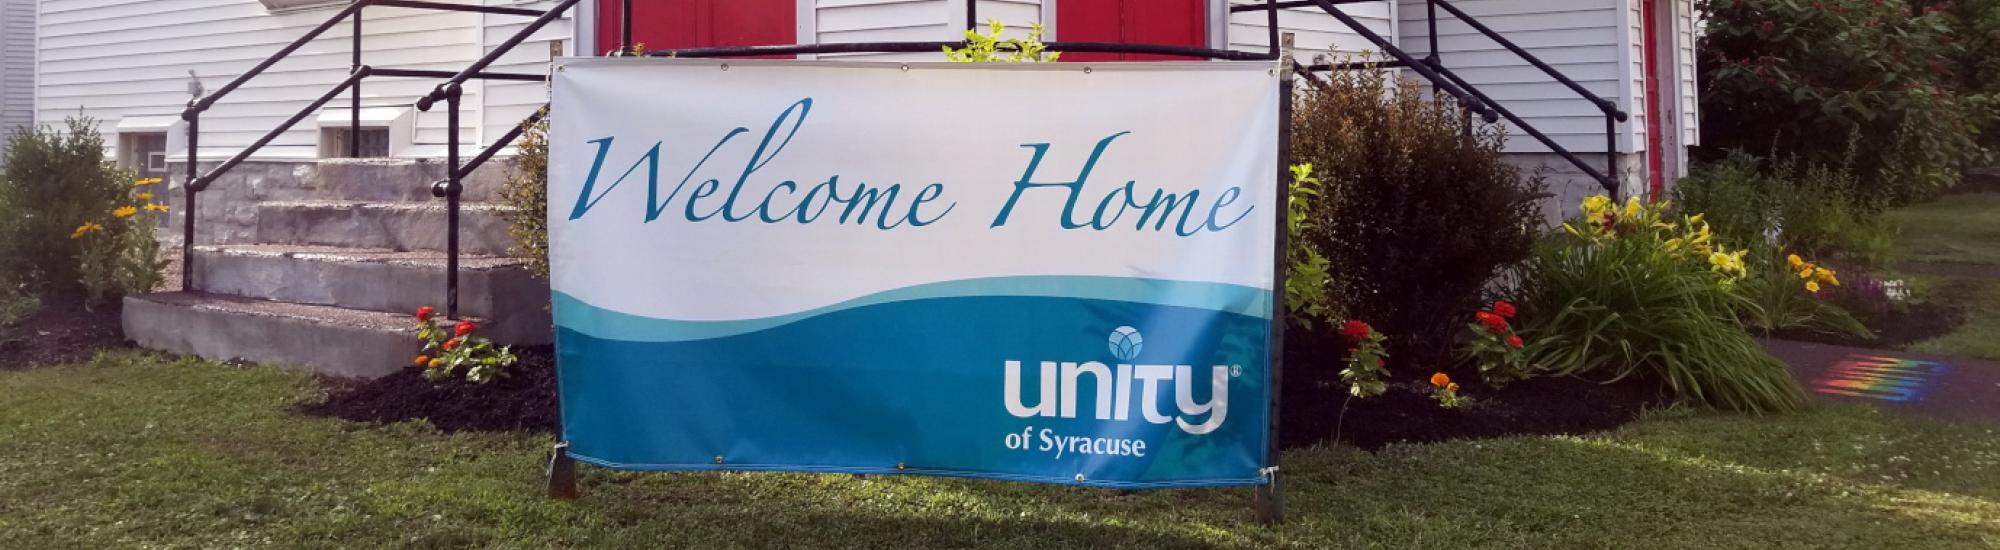 front entrance of the church with a "welcome home; unity of syracuse" banner